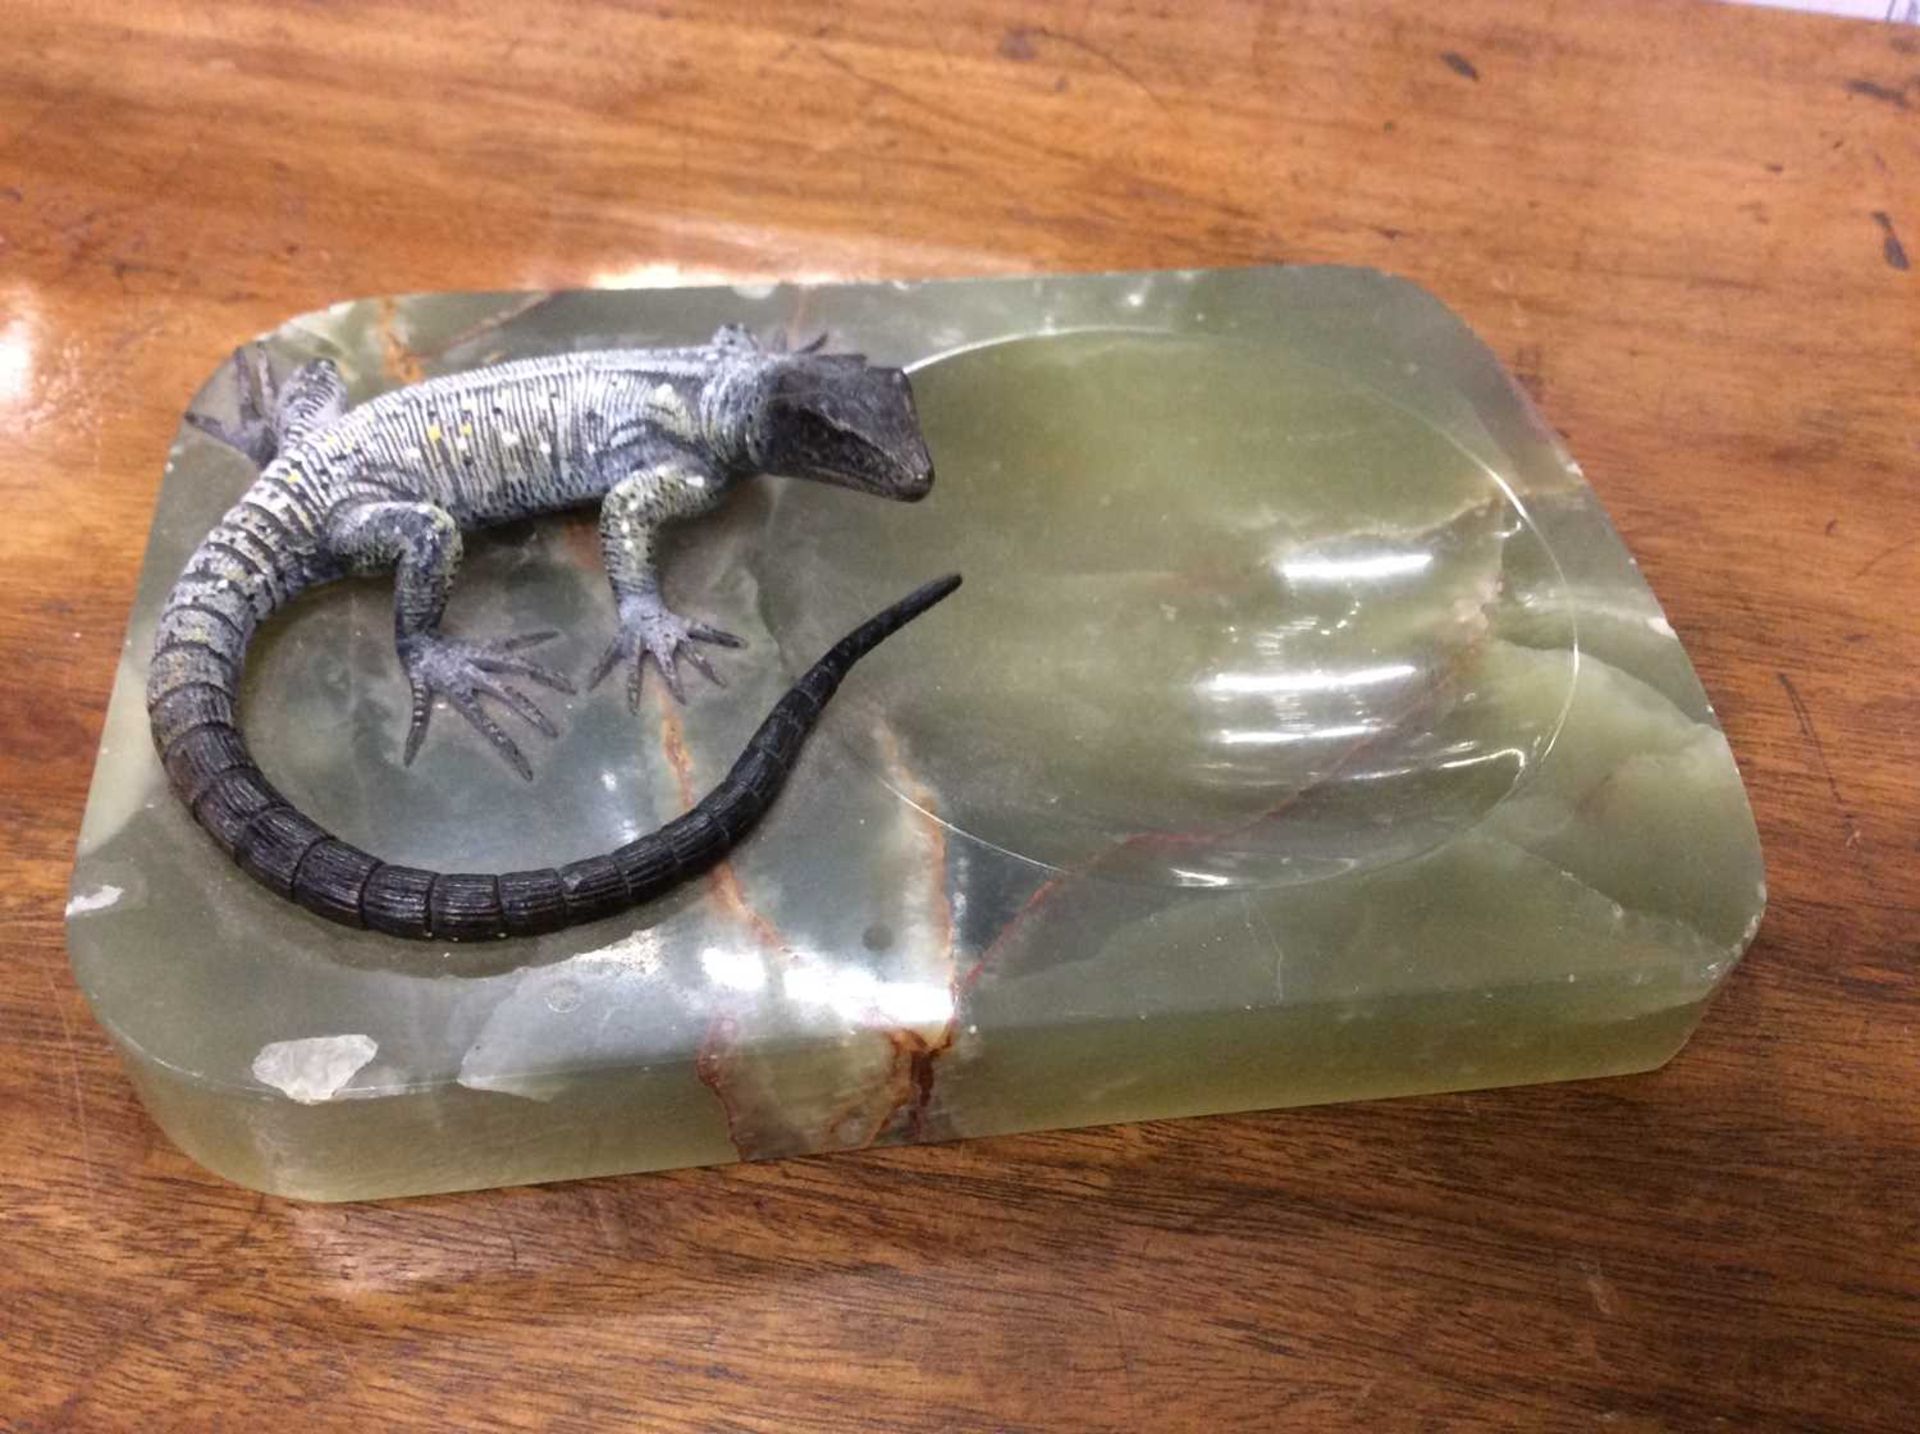 An onyx dish mounted with a cold painted bronze sculpture of a lizard